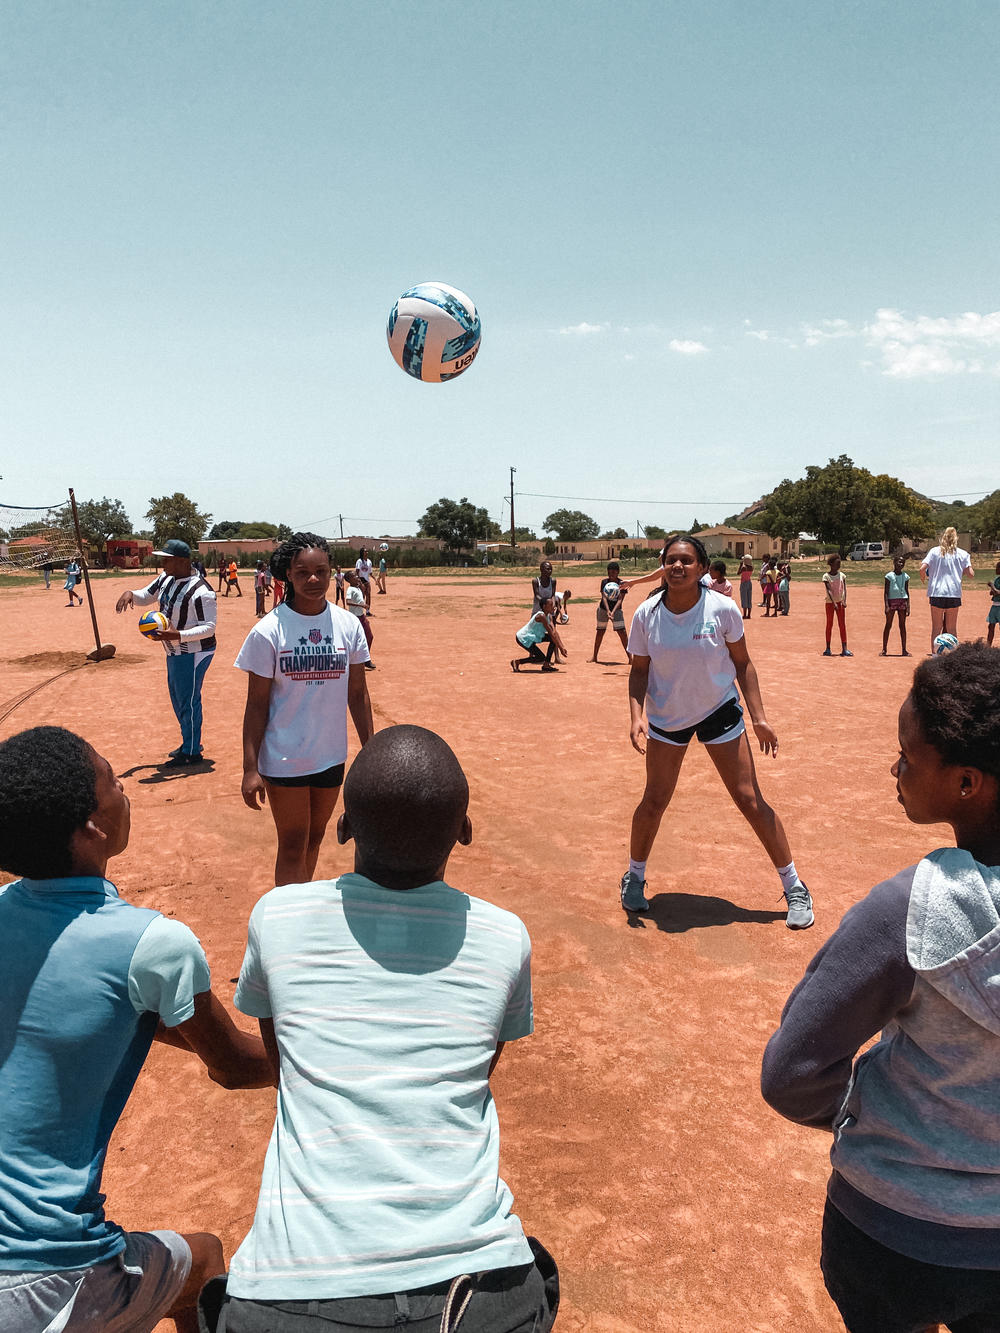 The athletes of the A5 Volleyball Club teaching children from Botswana how to play.